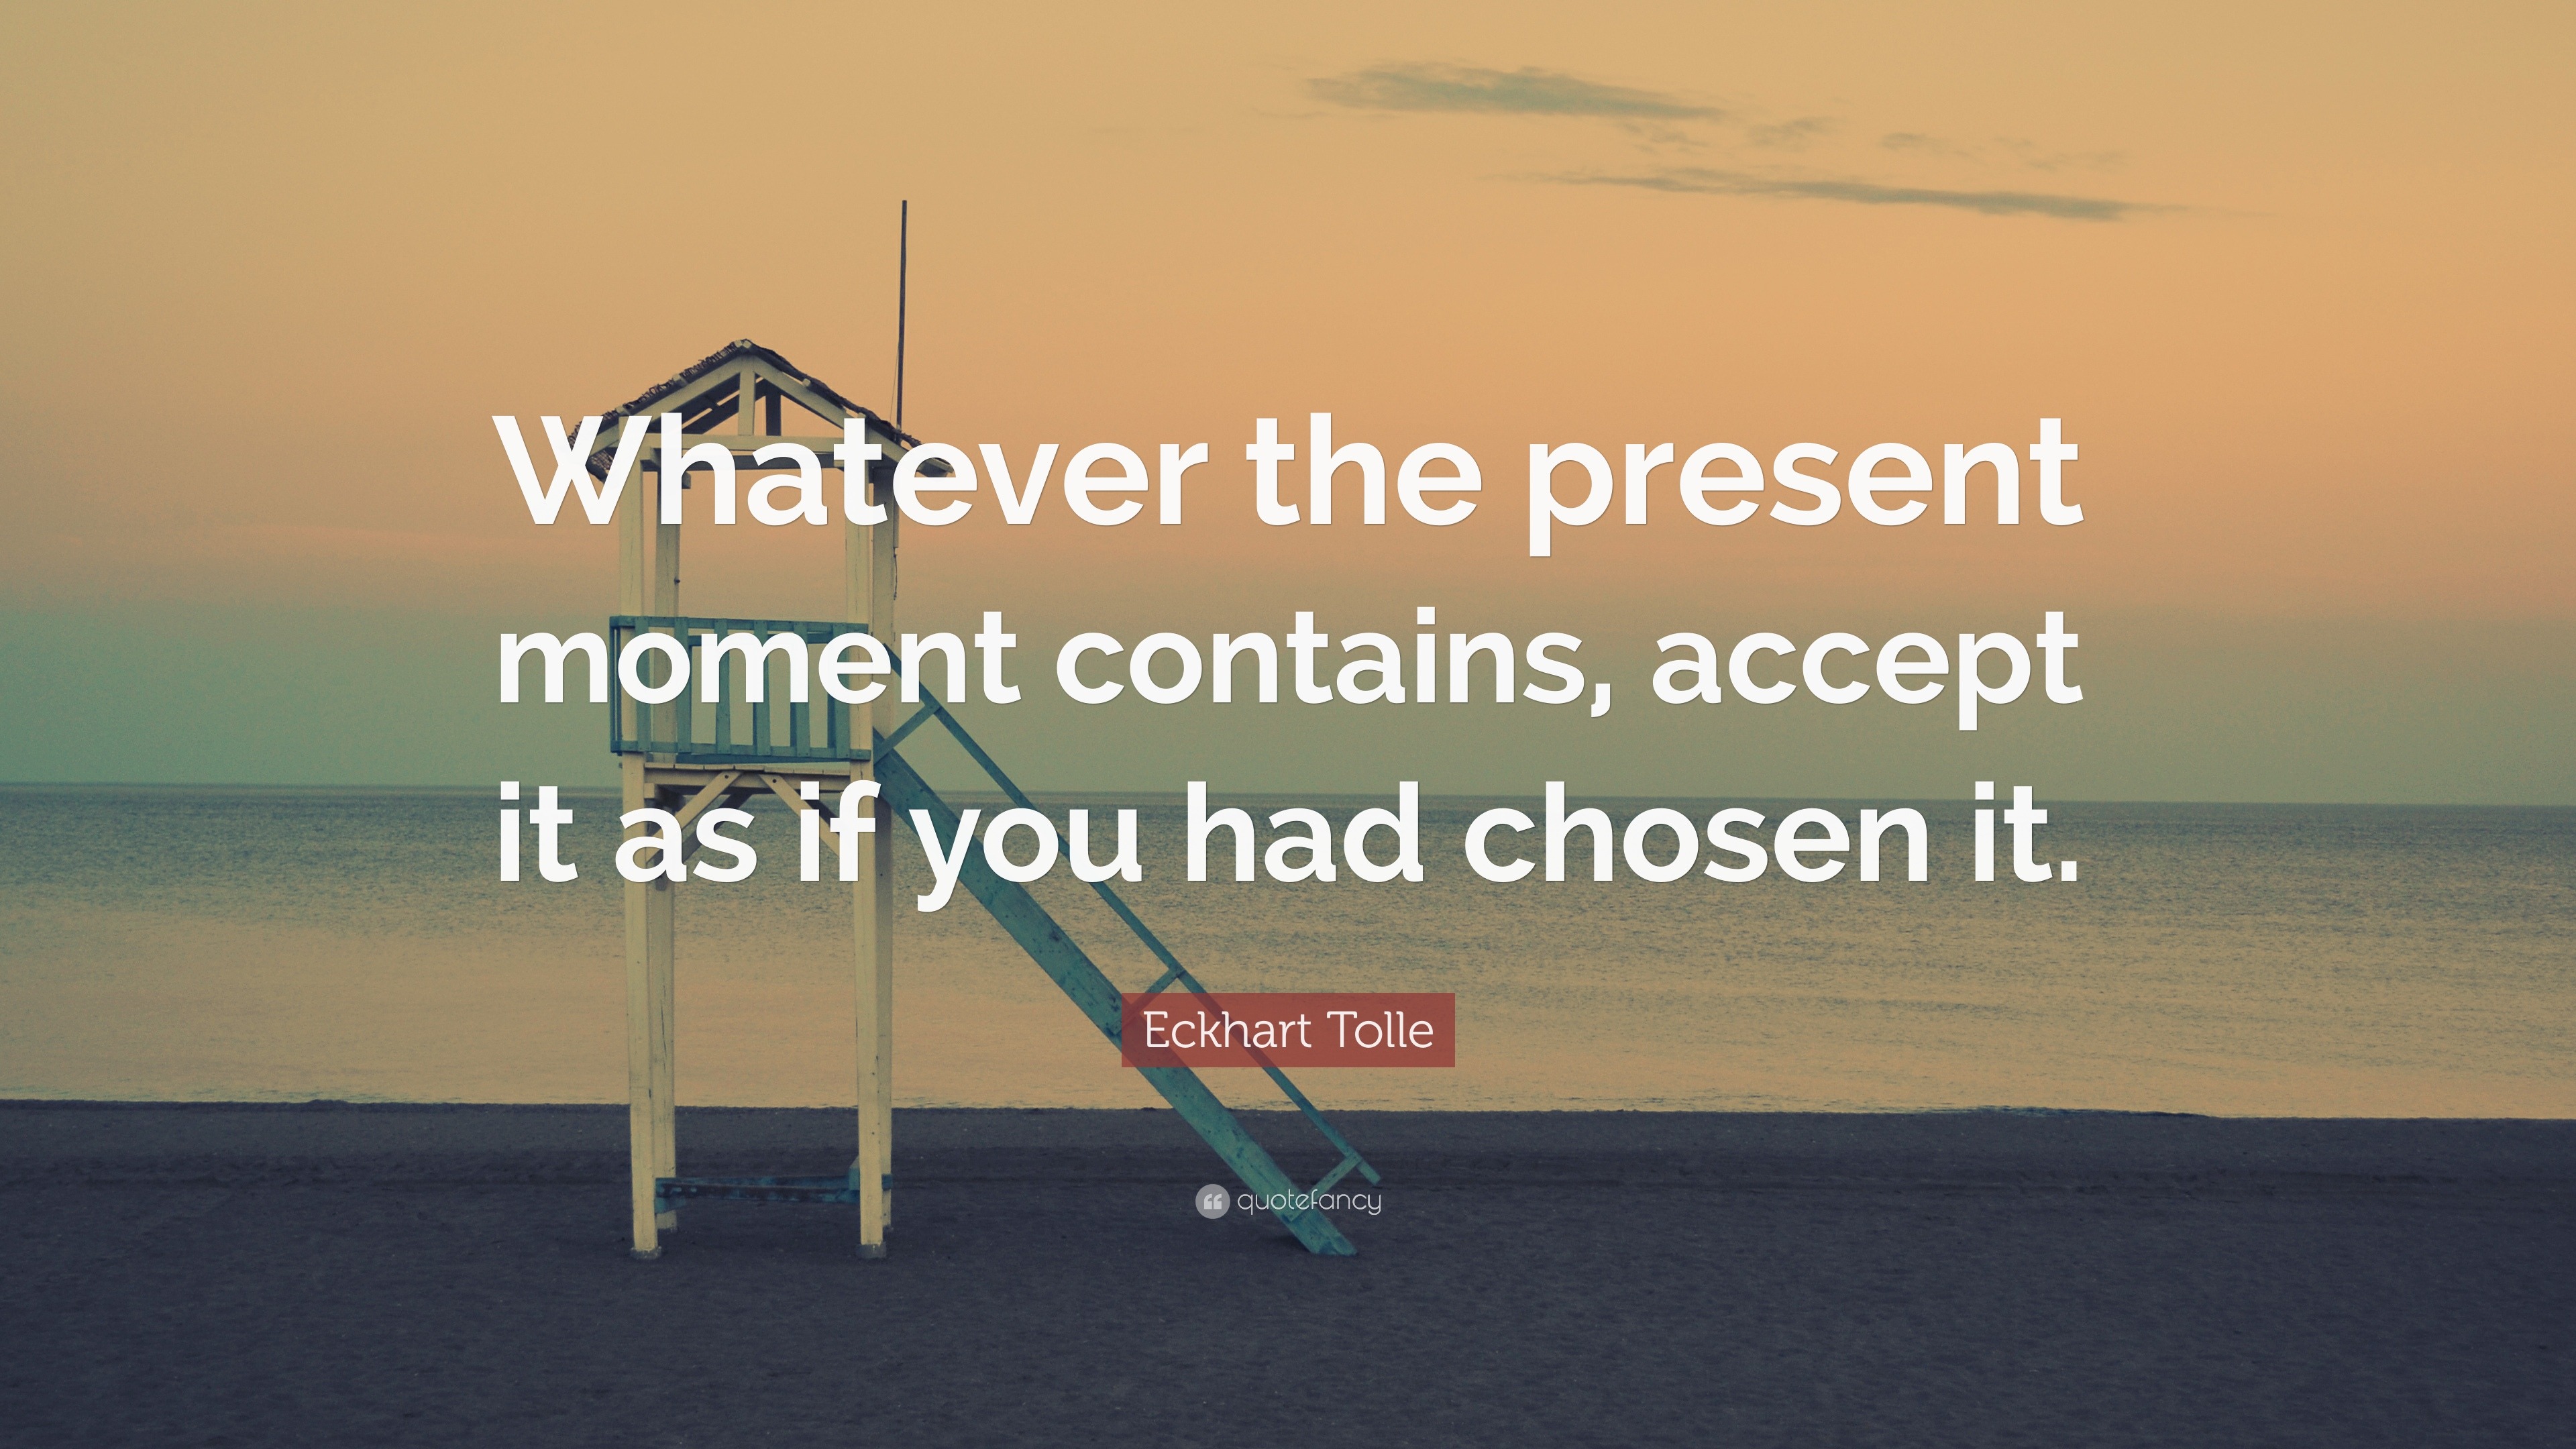 Eckhart Tolle Quote: “Whatever the present moment contains, accept it ...